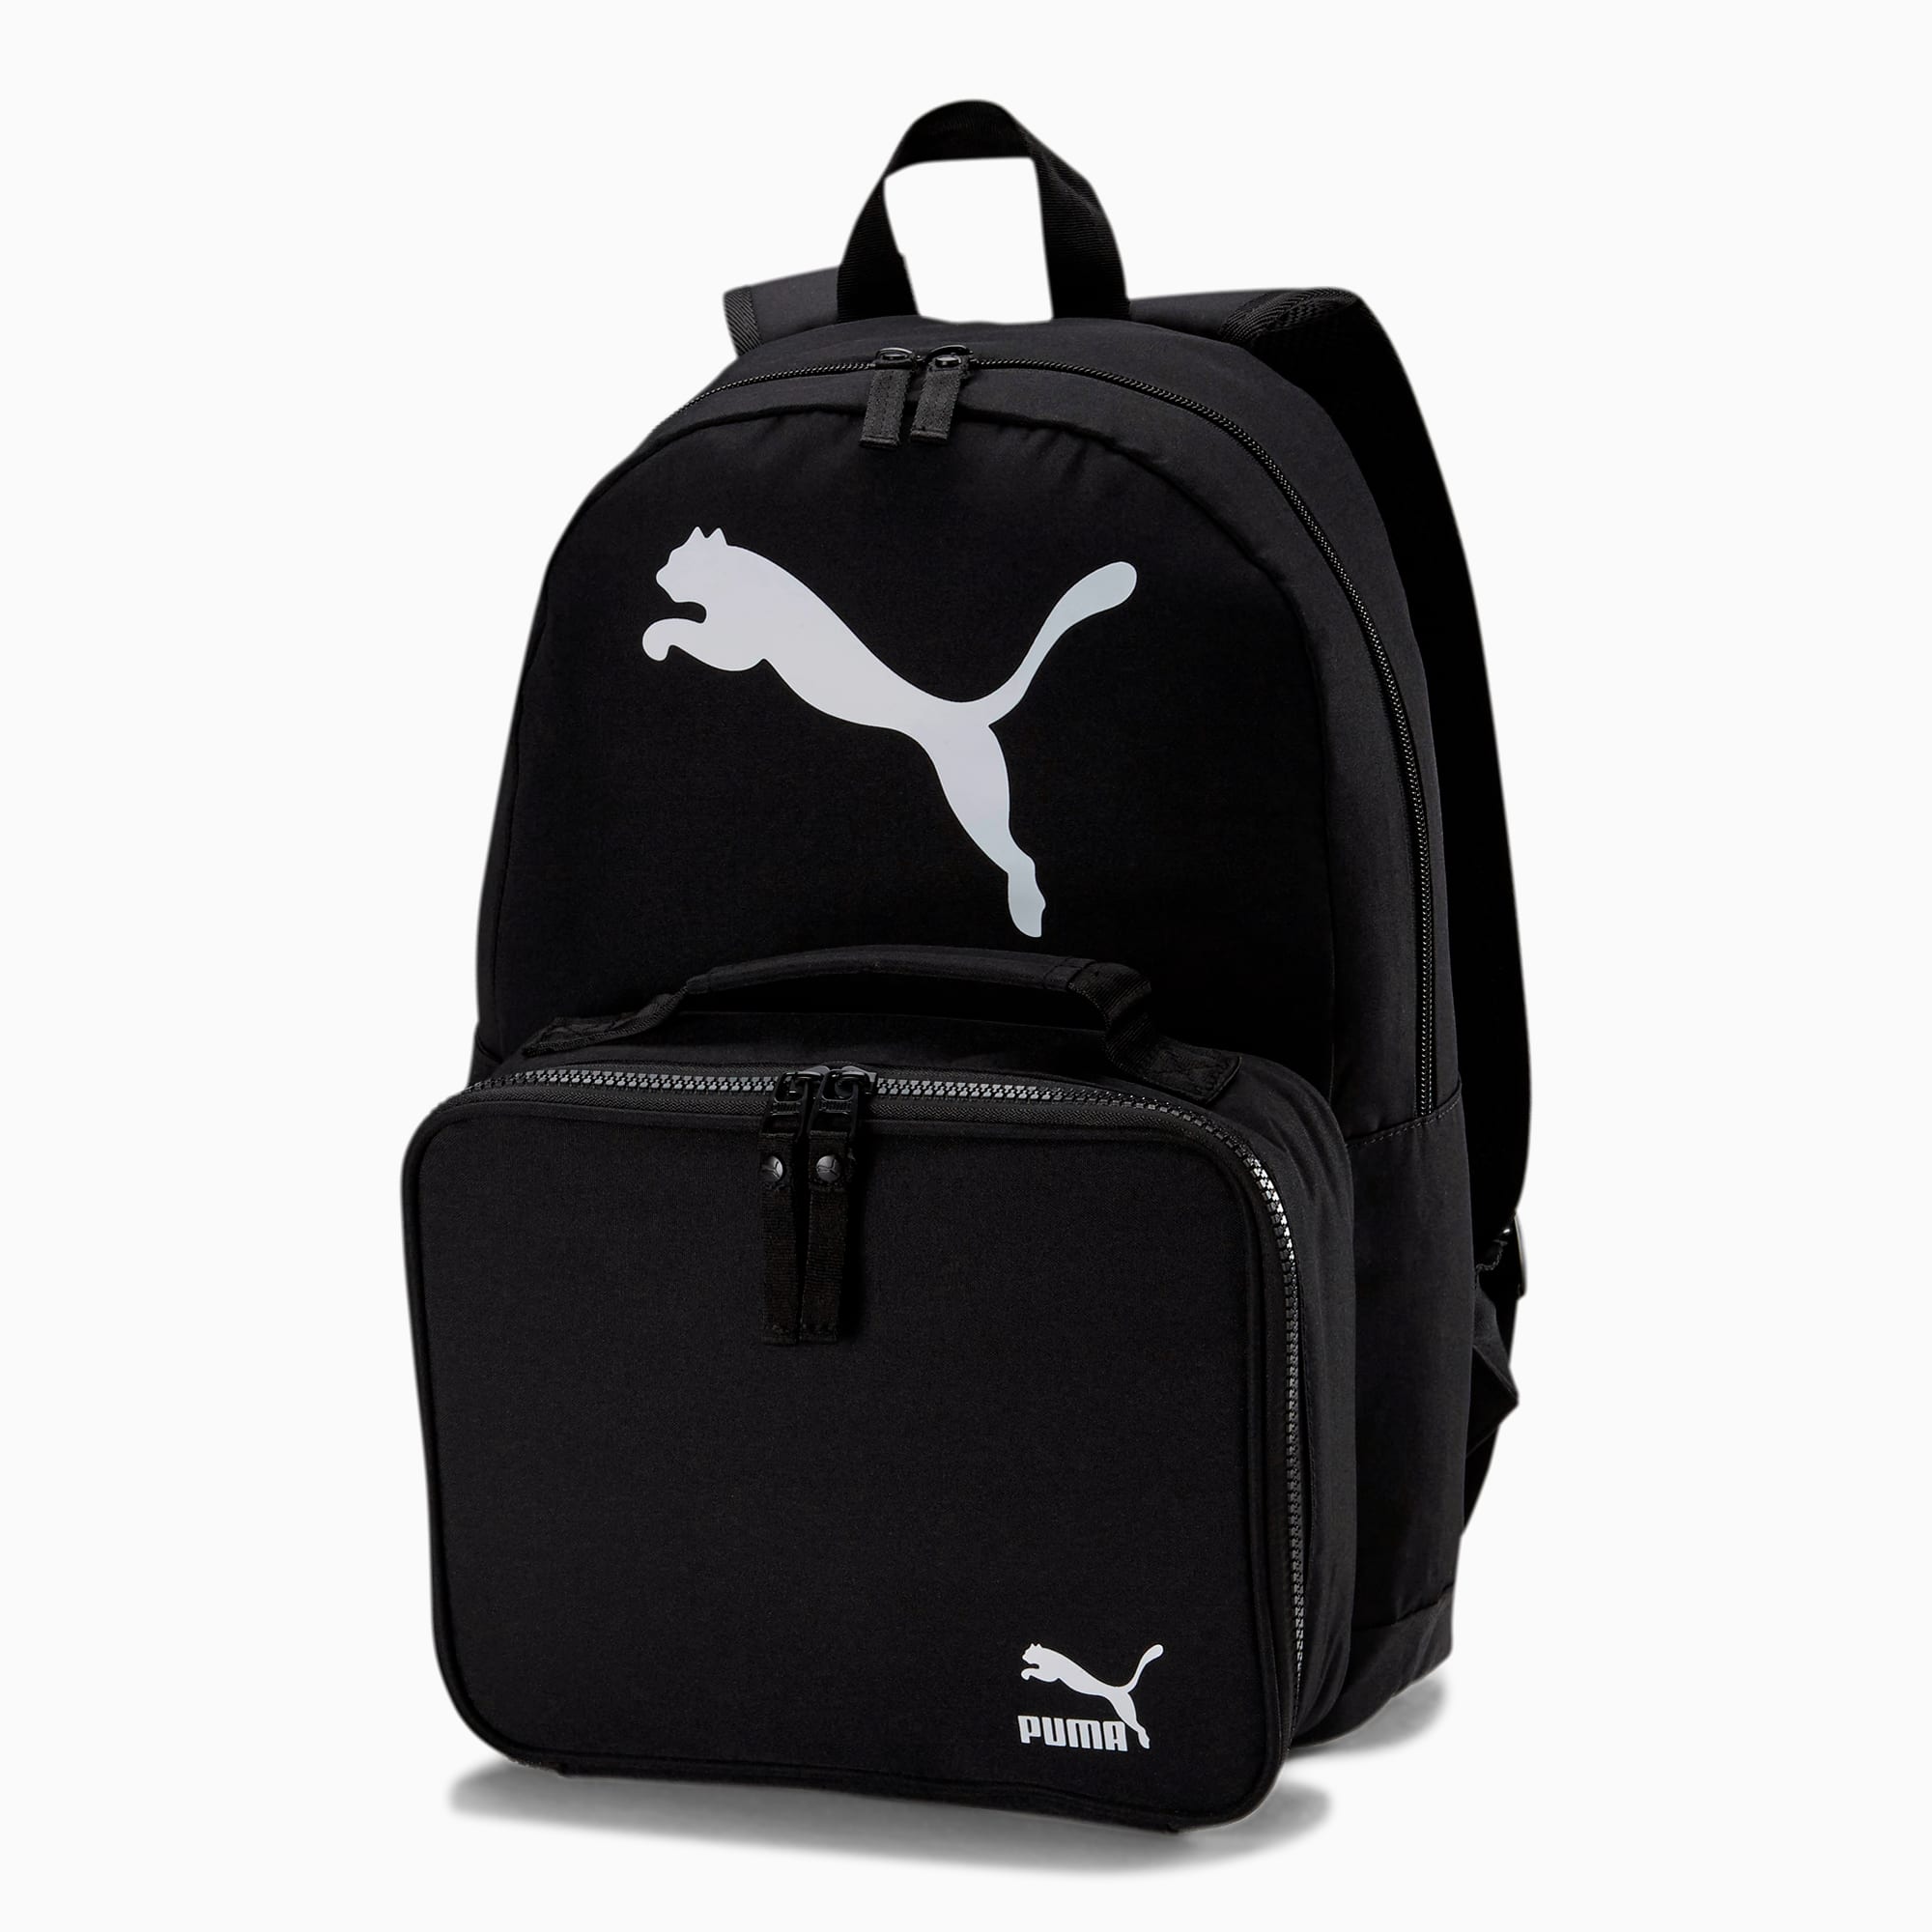 puma backpack and lunch bag